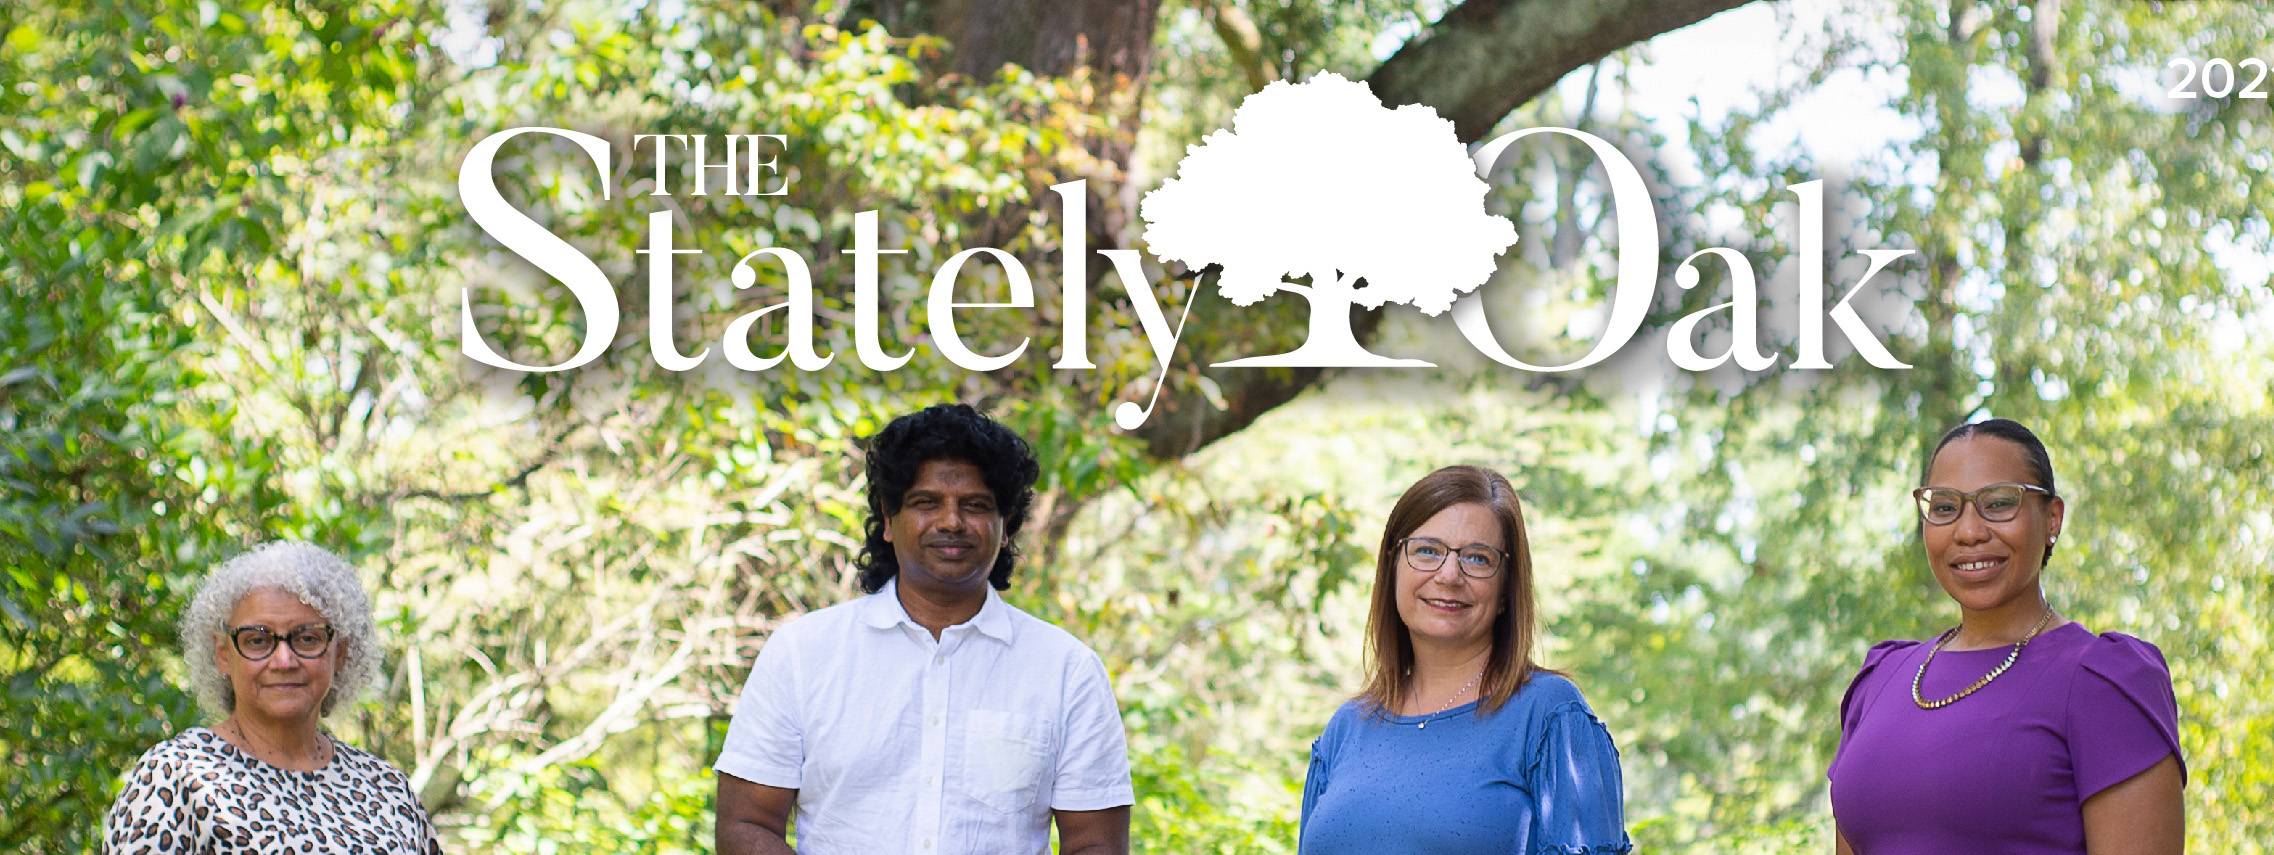 The Stately Oak Cover, four people featured